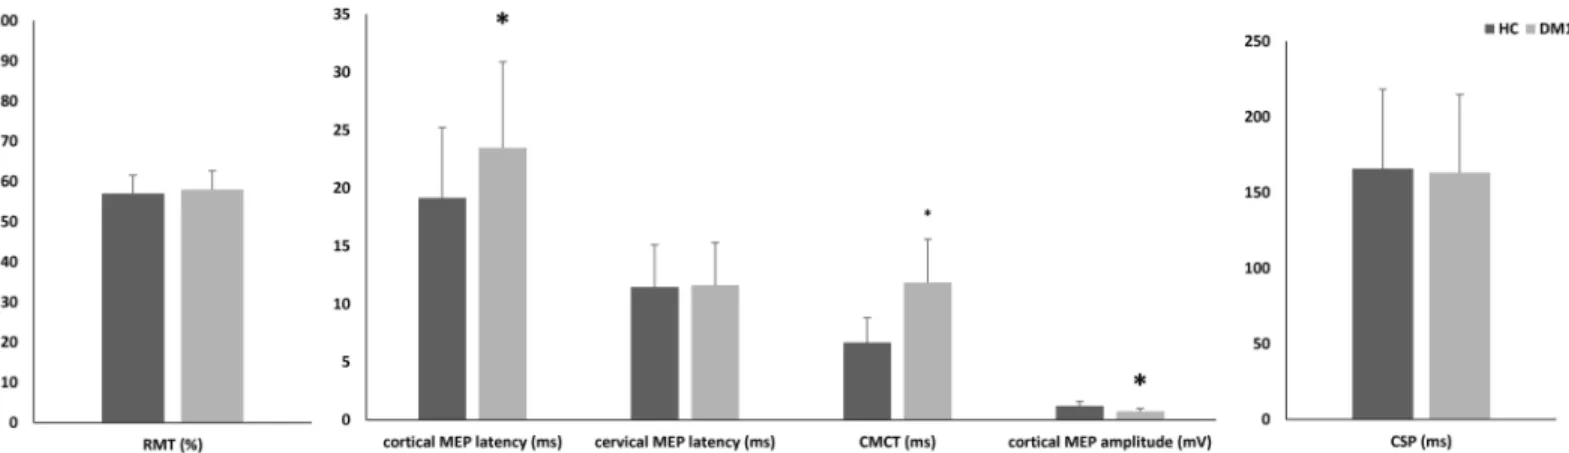 Fig 1 Illustrates the baseline TMS findings on RMT, cortical and cervical MEP, and CSP